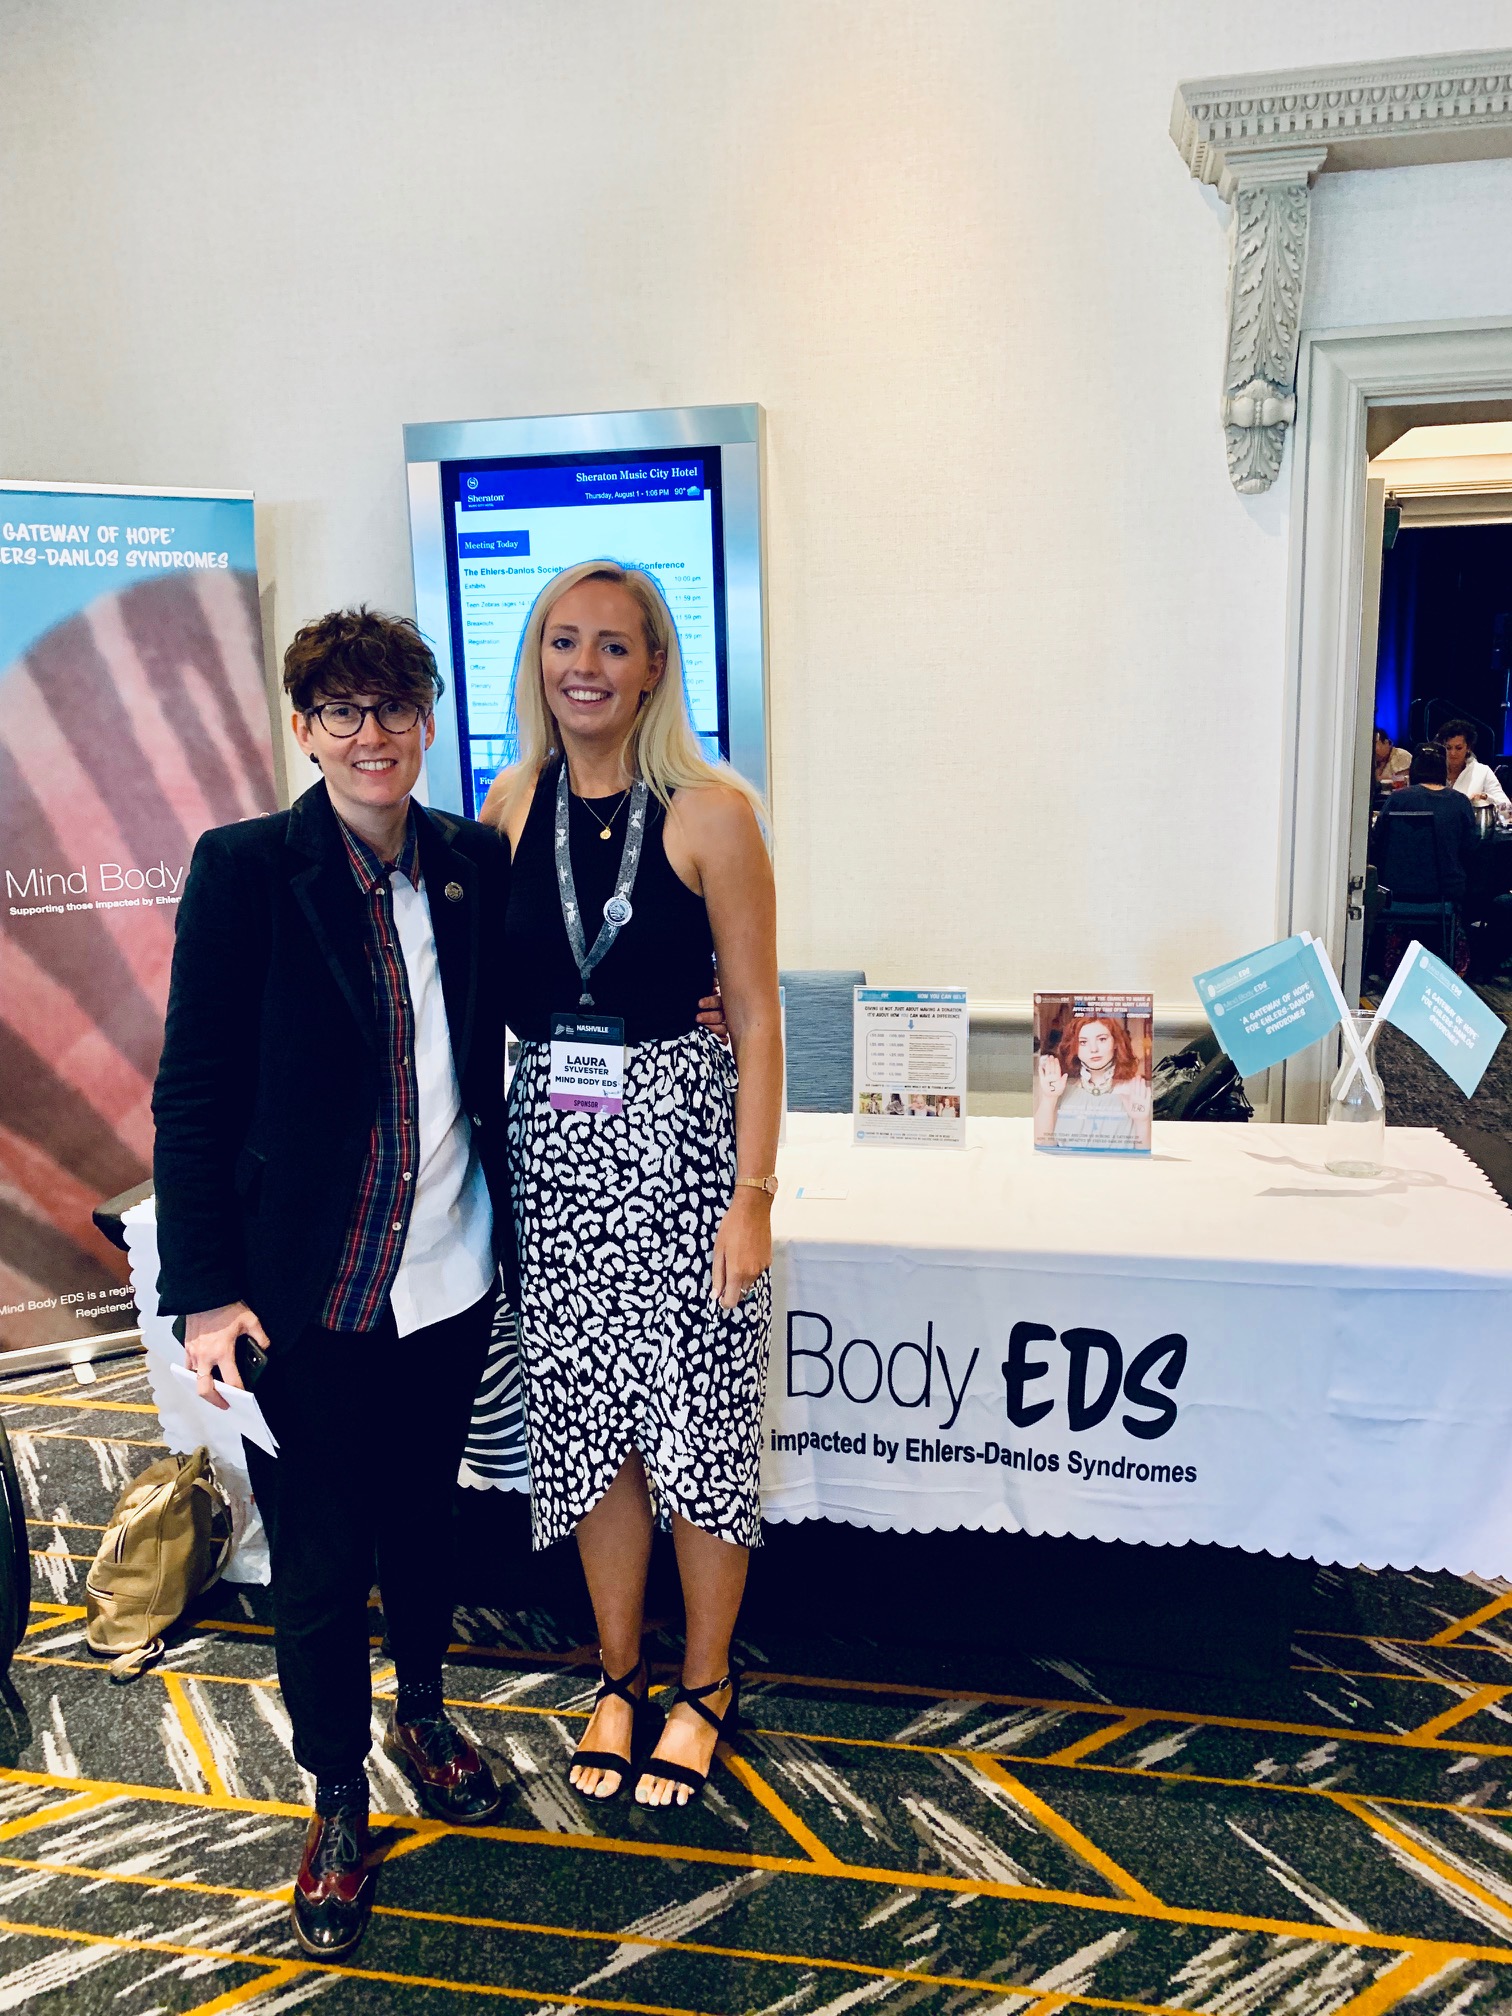 Lara Bloom (CEO of The Ehlers-Danlos Society) with Laura Sylvester (Founder of Mind Body EDS)